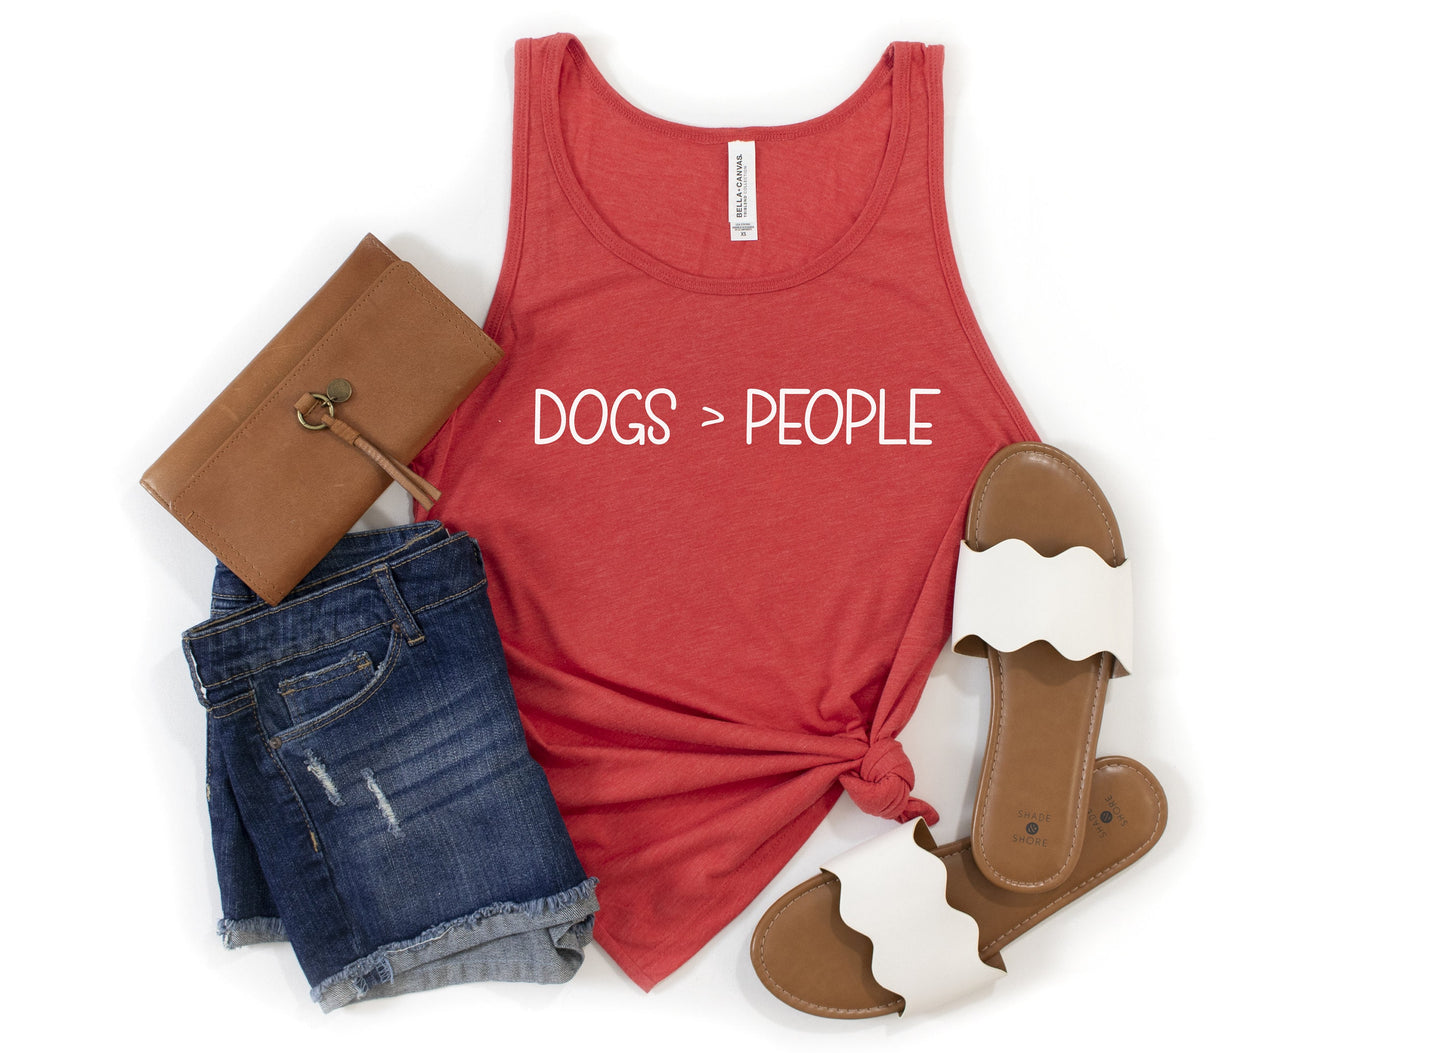 Dogs > People Tank Top